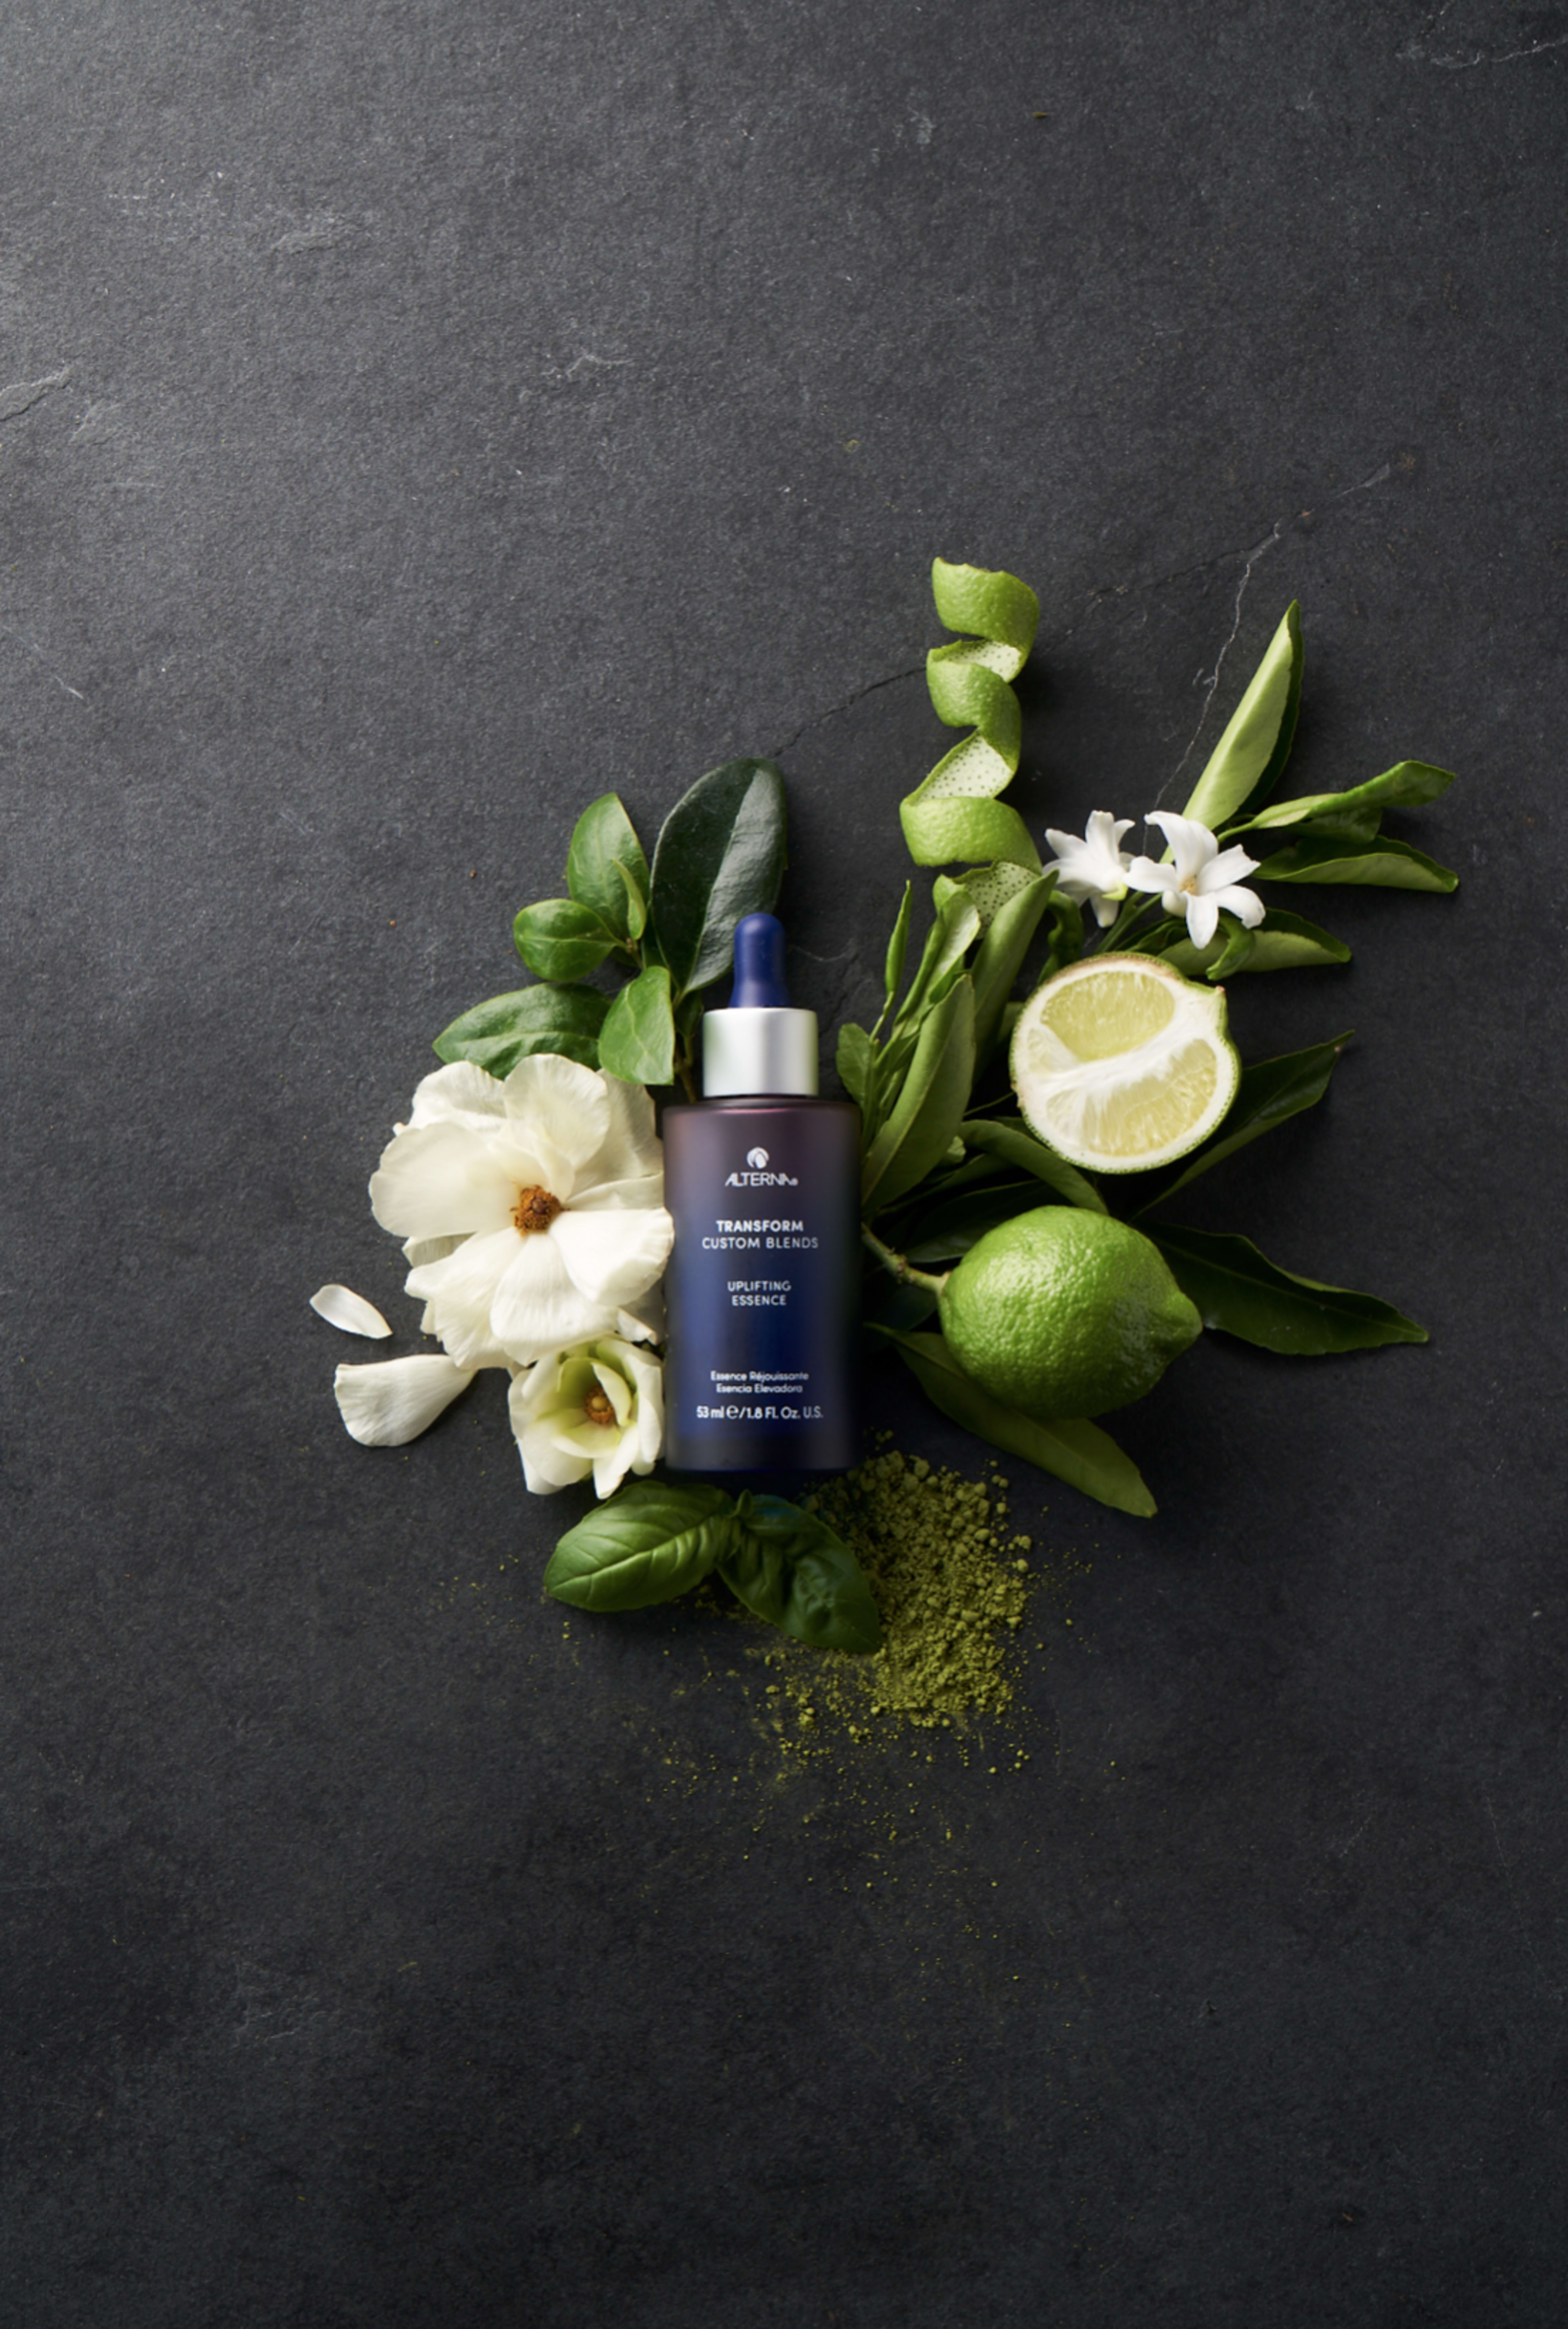 A product photoshoot featuring skin care, lime, and flowers.